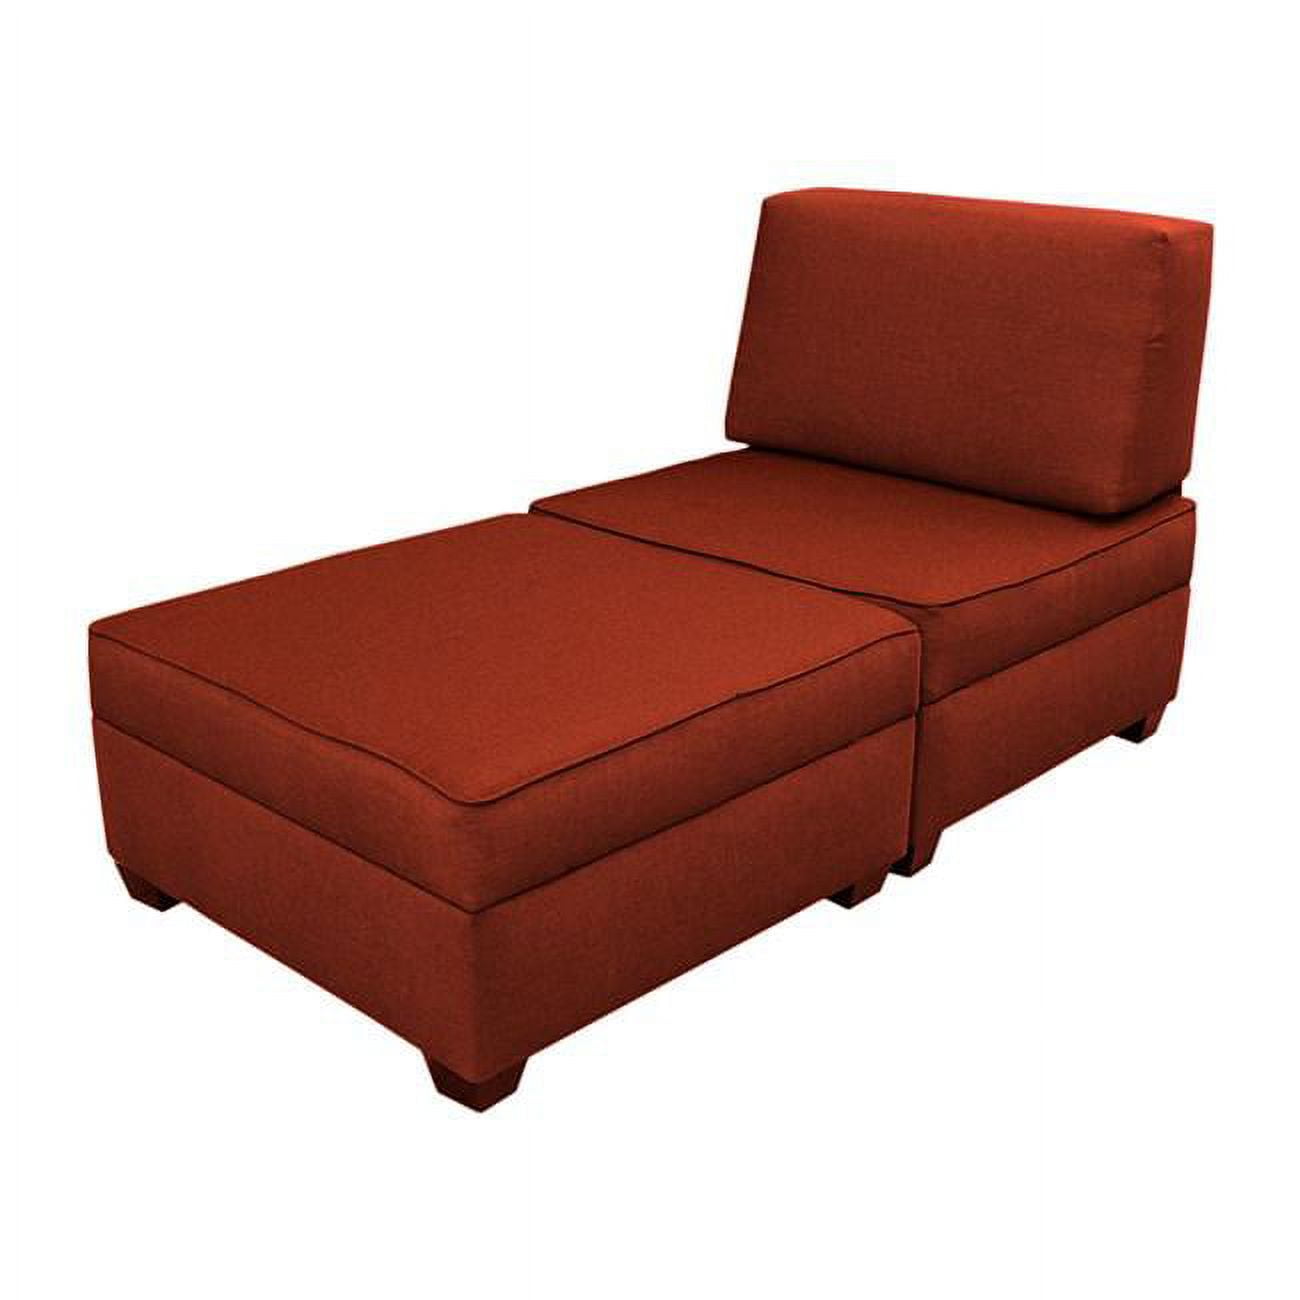 Mfcl30-tc 30 In. Chaise Lounge Storage Ottomans - Brick